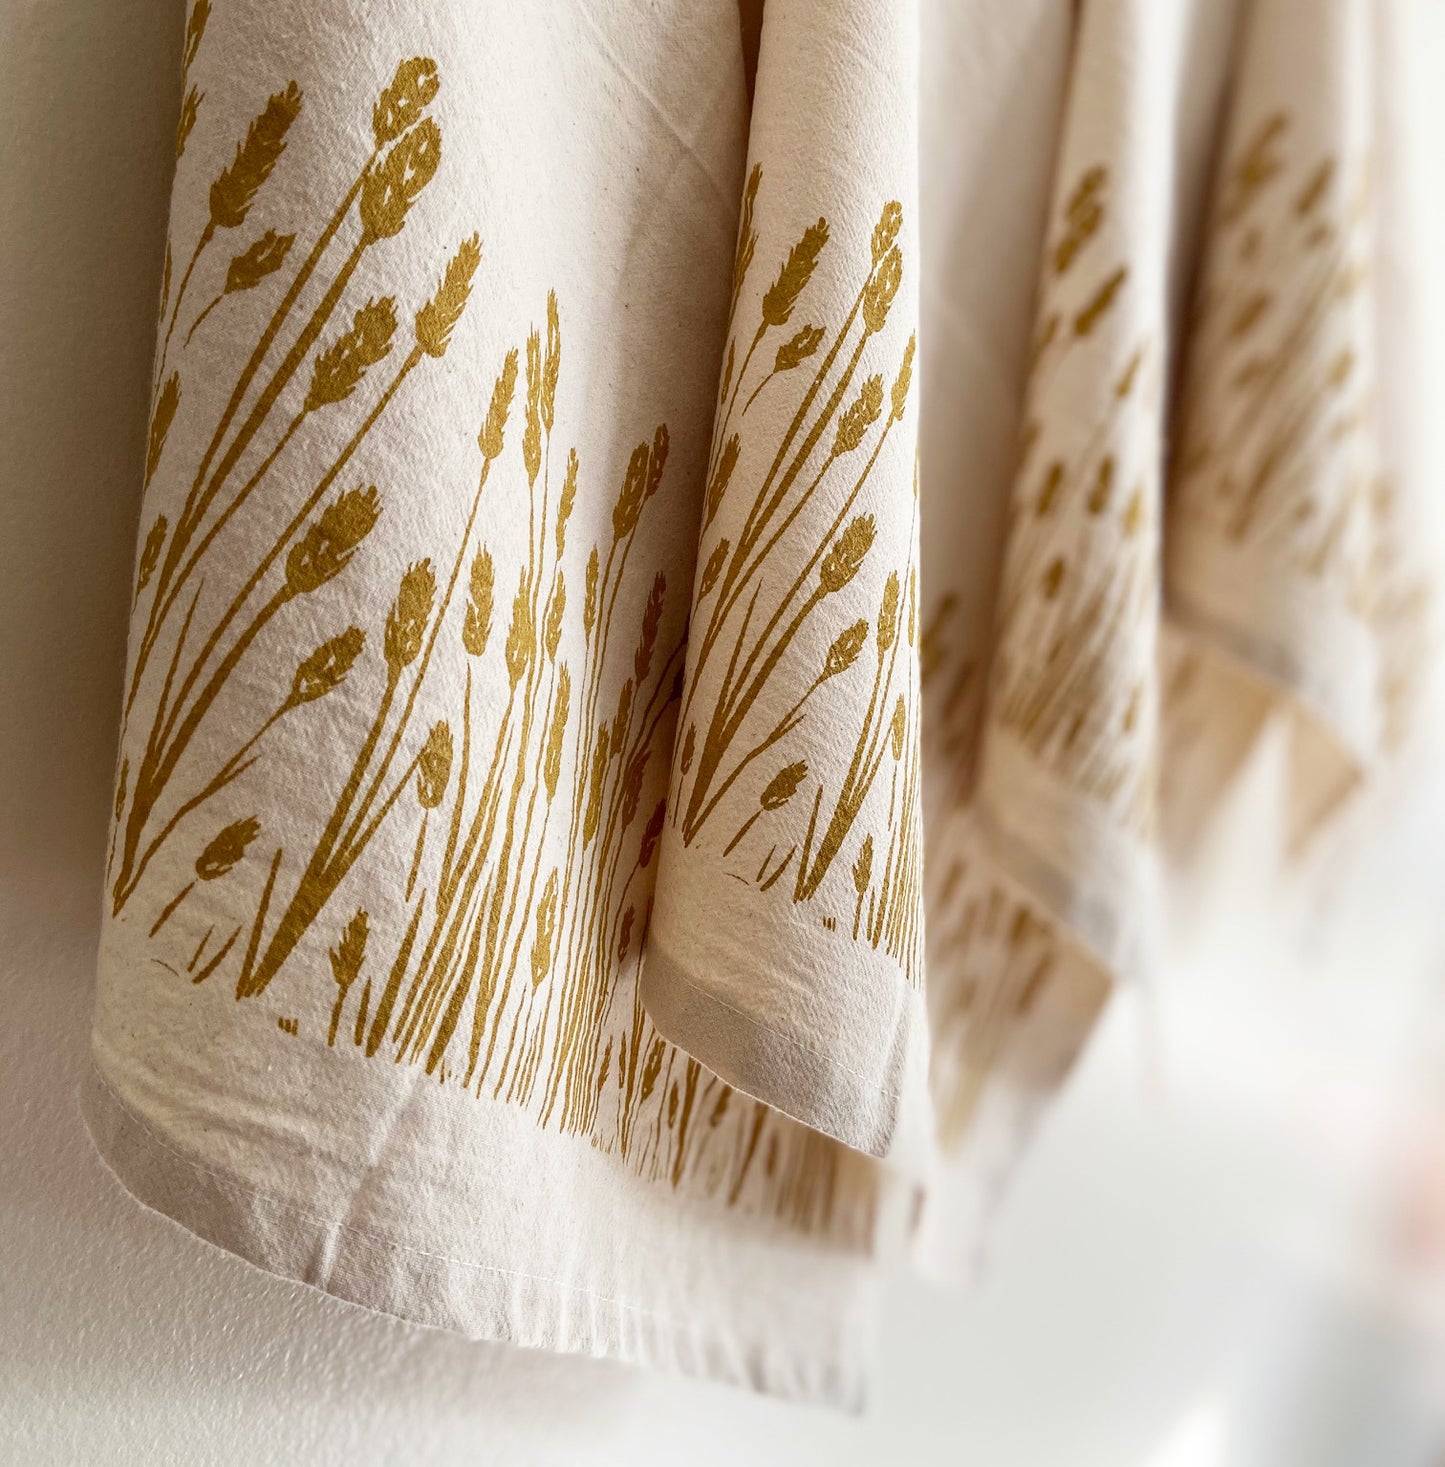 Organic Golden Wheat Hand Printed Napkins Set of 4 or 8